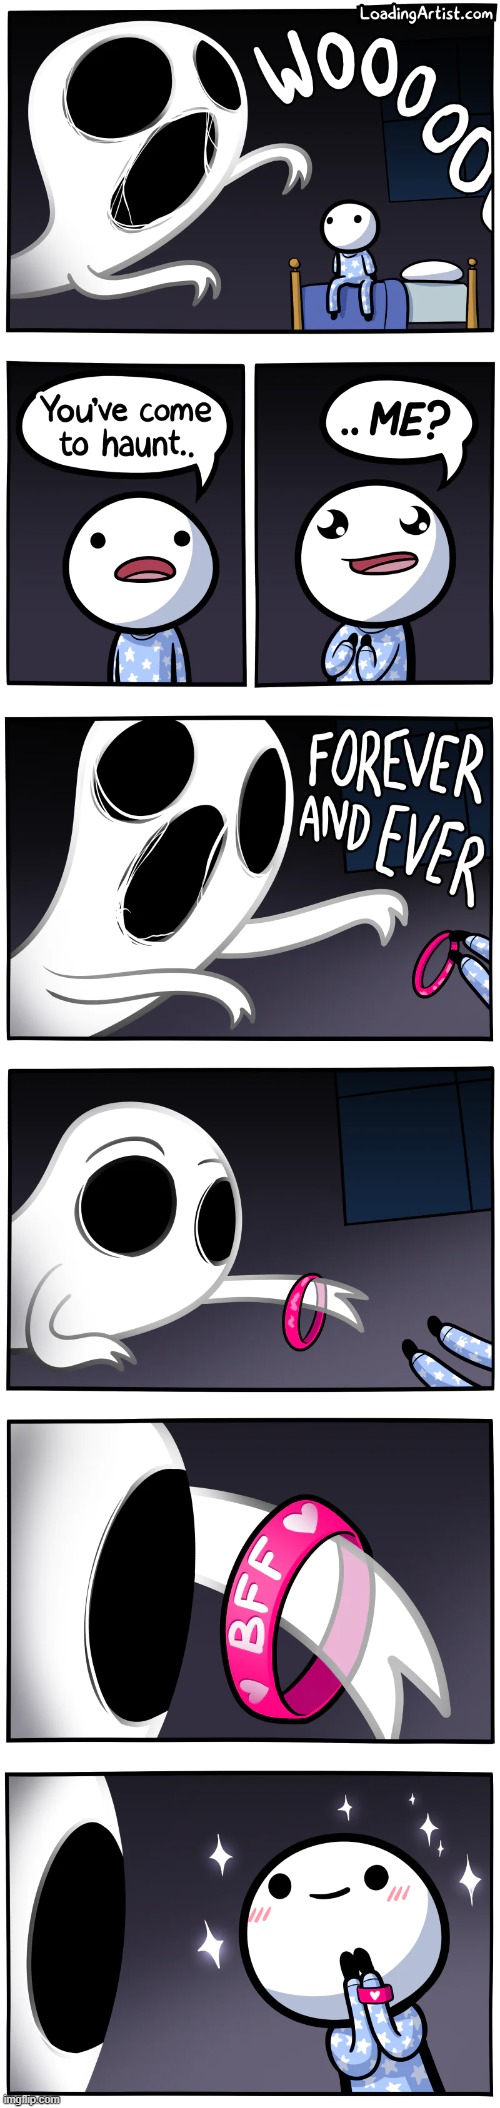 I wish I had a ghost friend- | image tagged in ghost,bff,wholesome | made w/ Imgflip meme maker